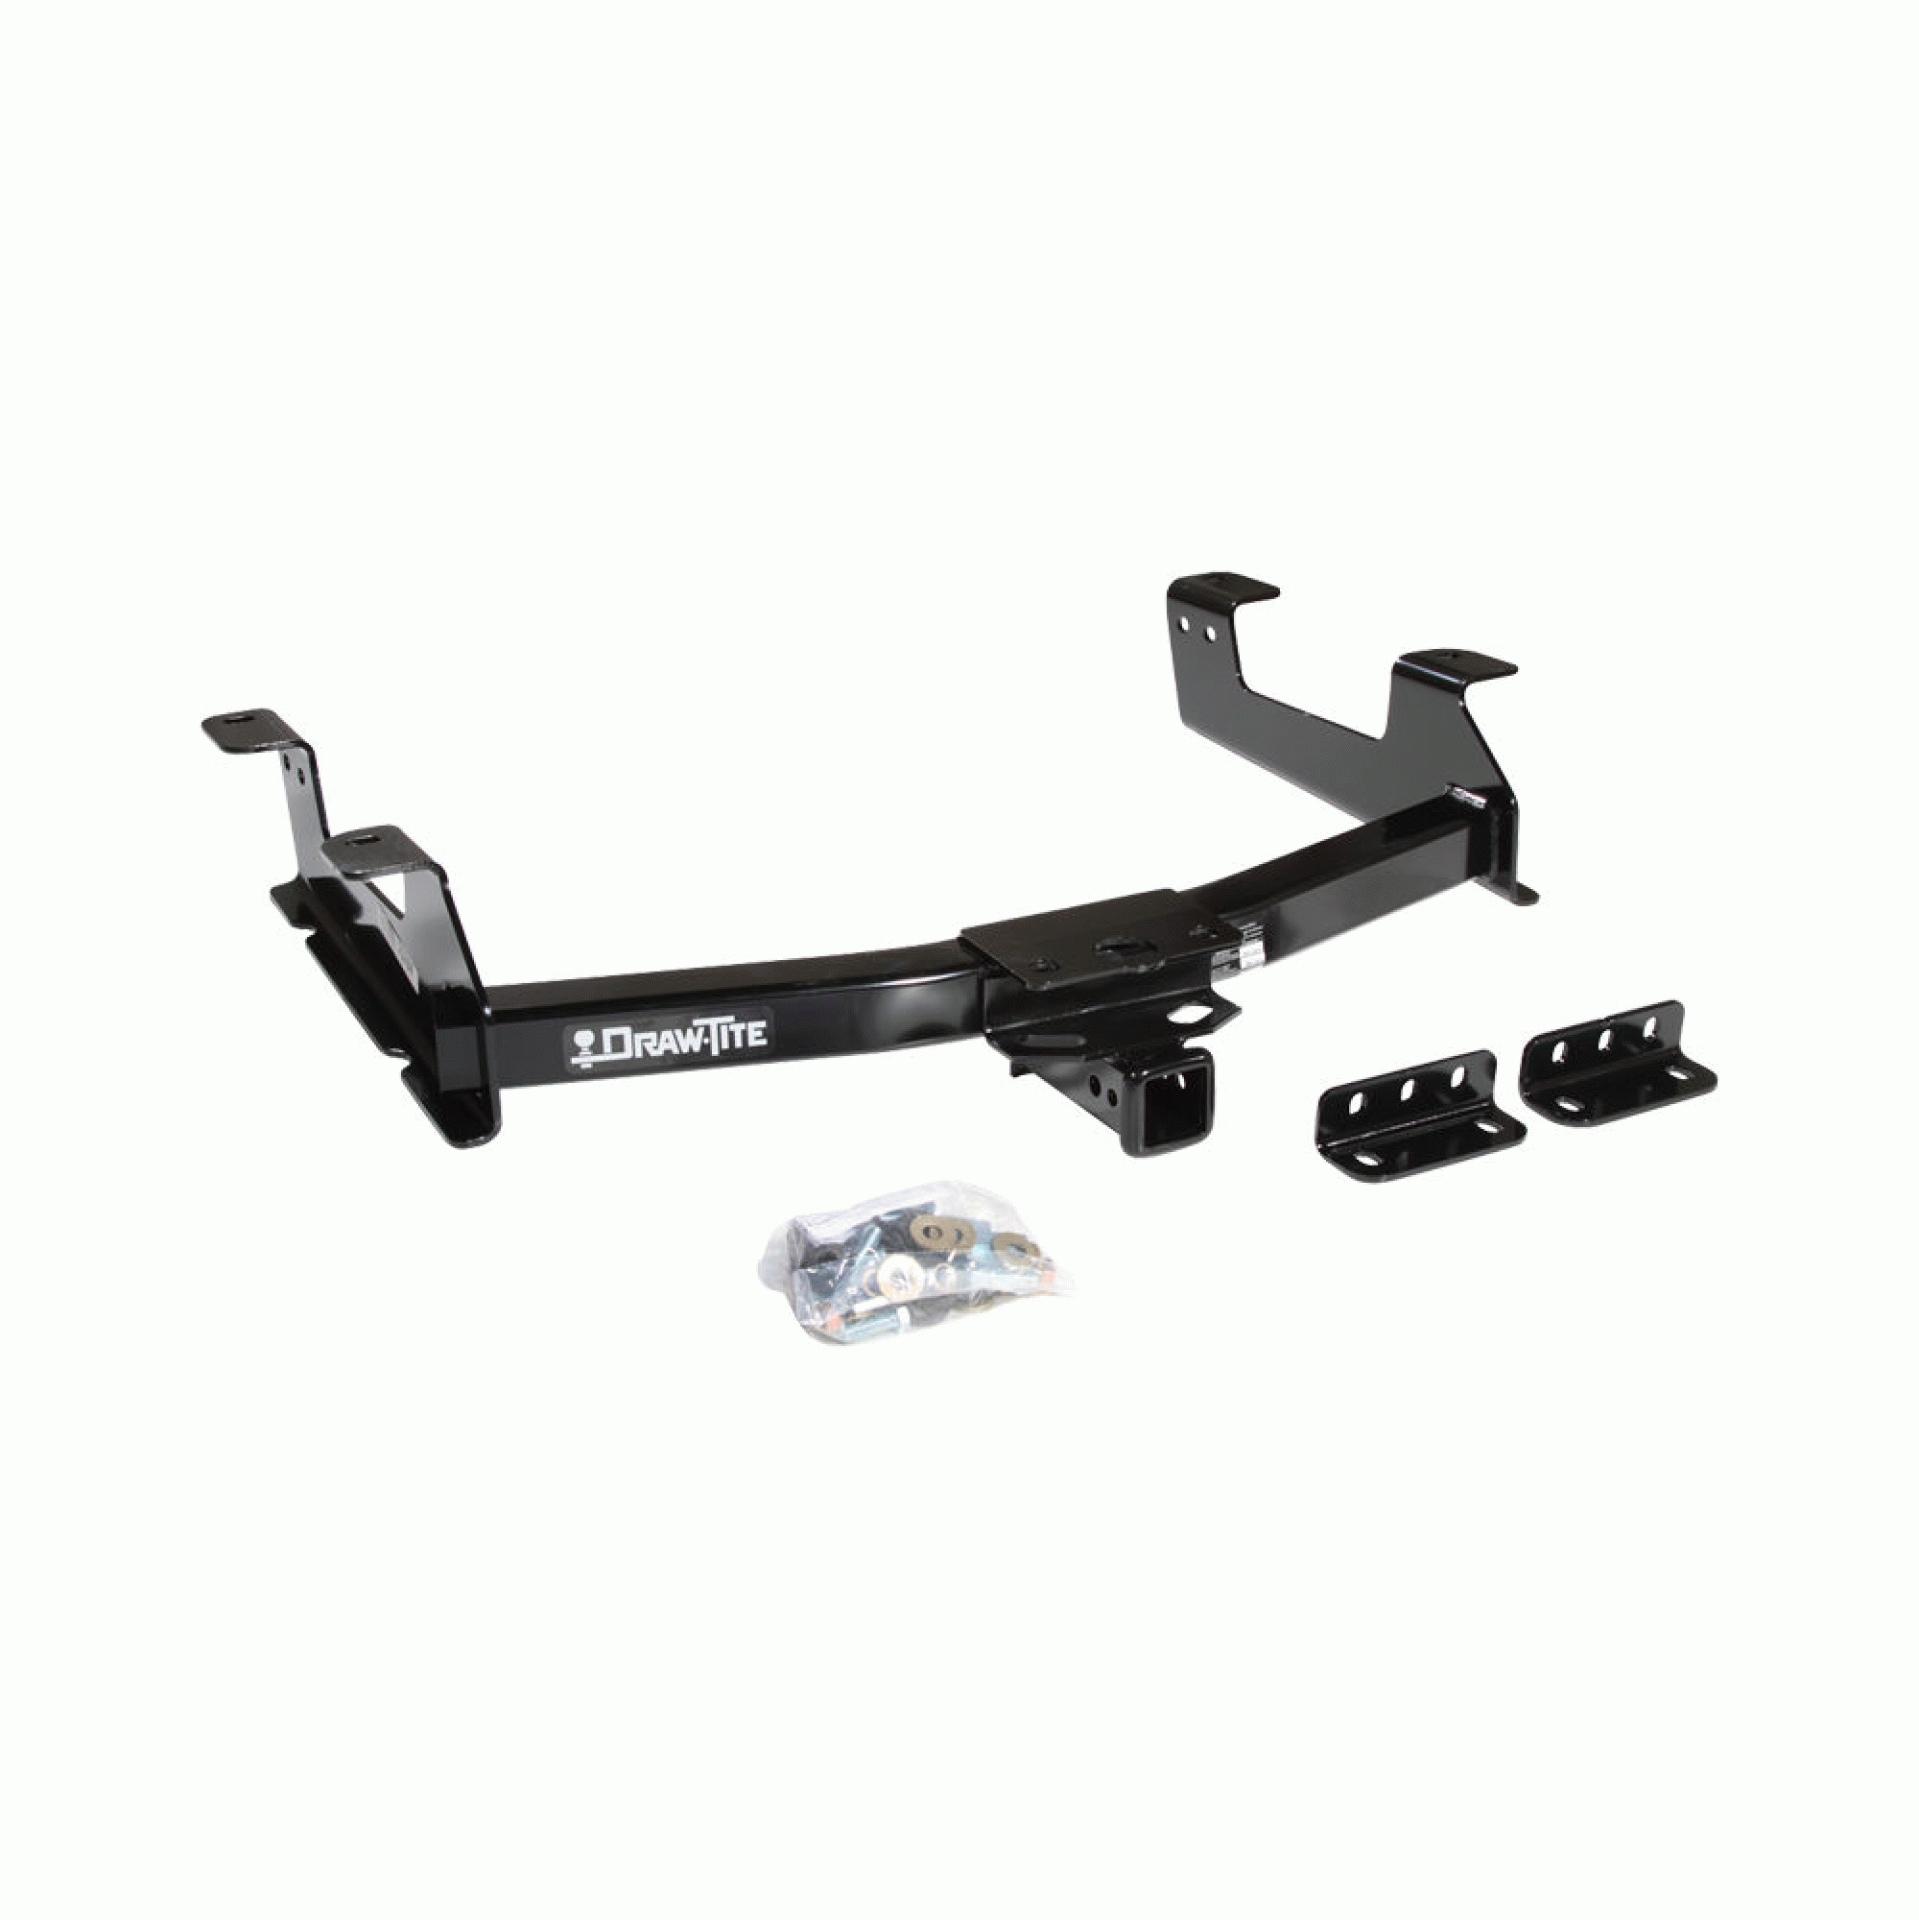 DRAW-TITE | 75707 | HITCH CLASS III REQUIRES 2 INCH REMOVABLE DRAWBAR